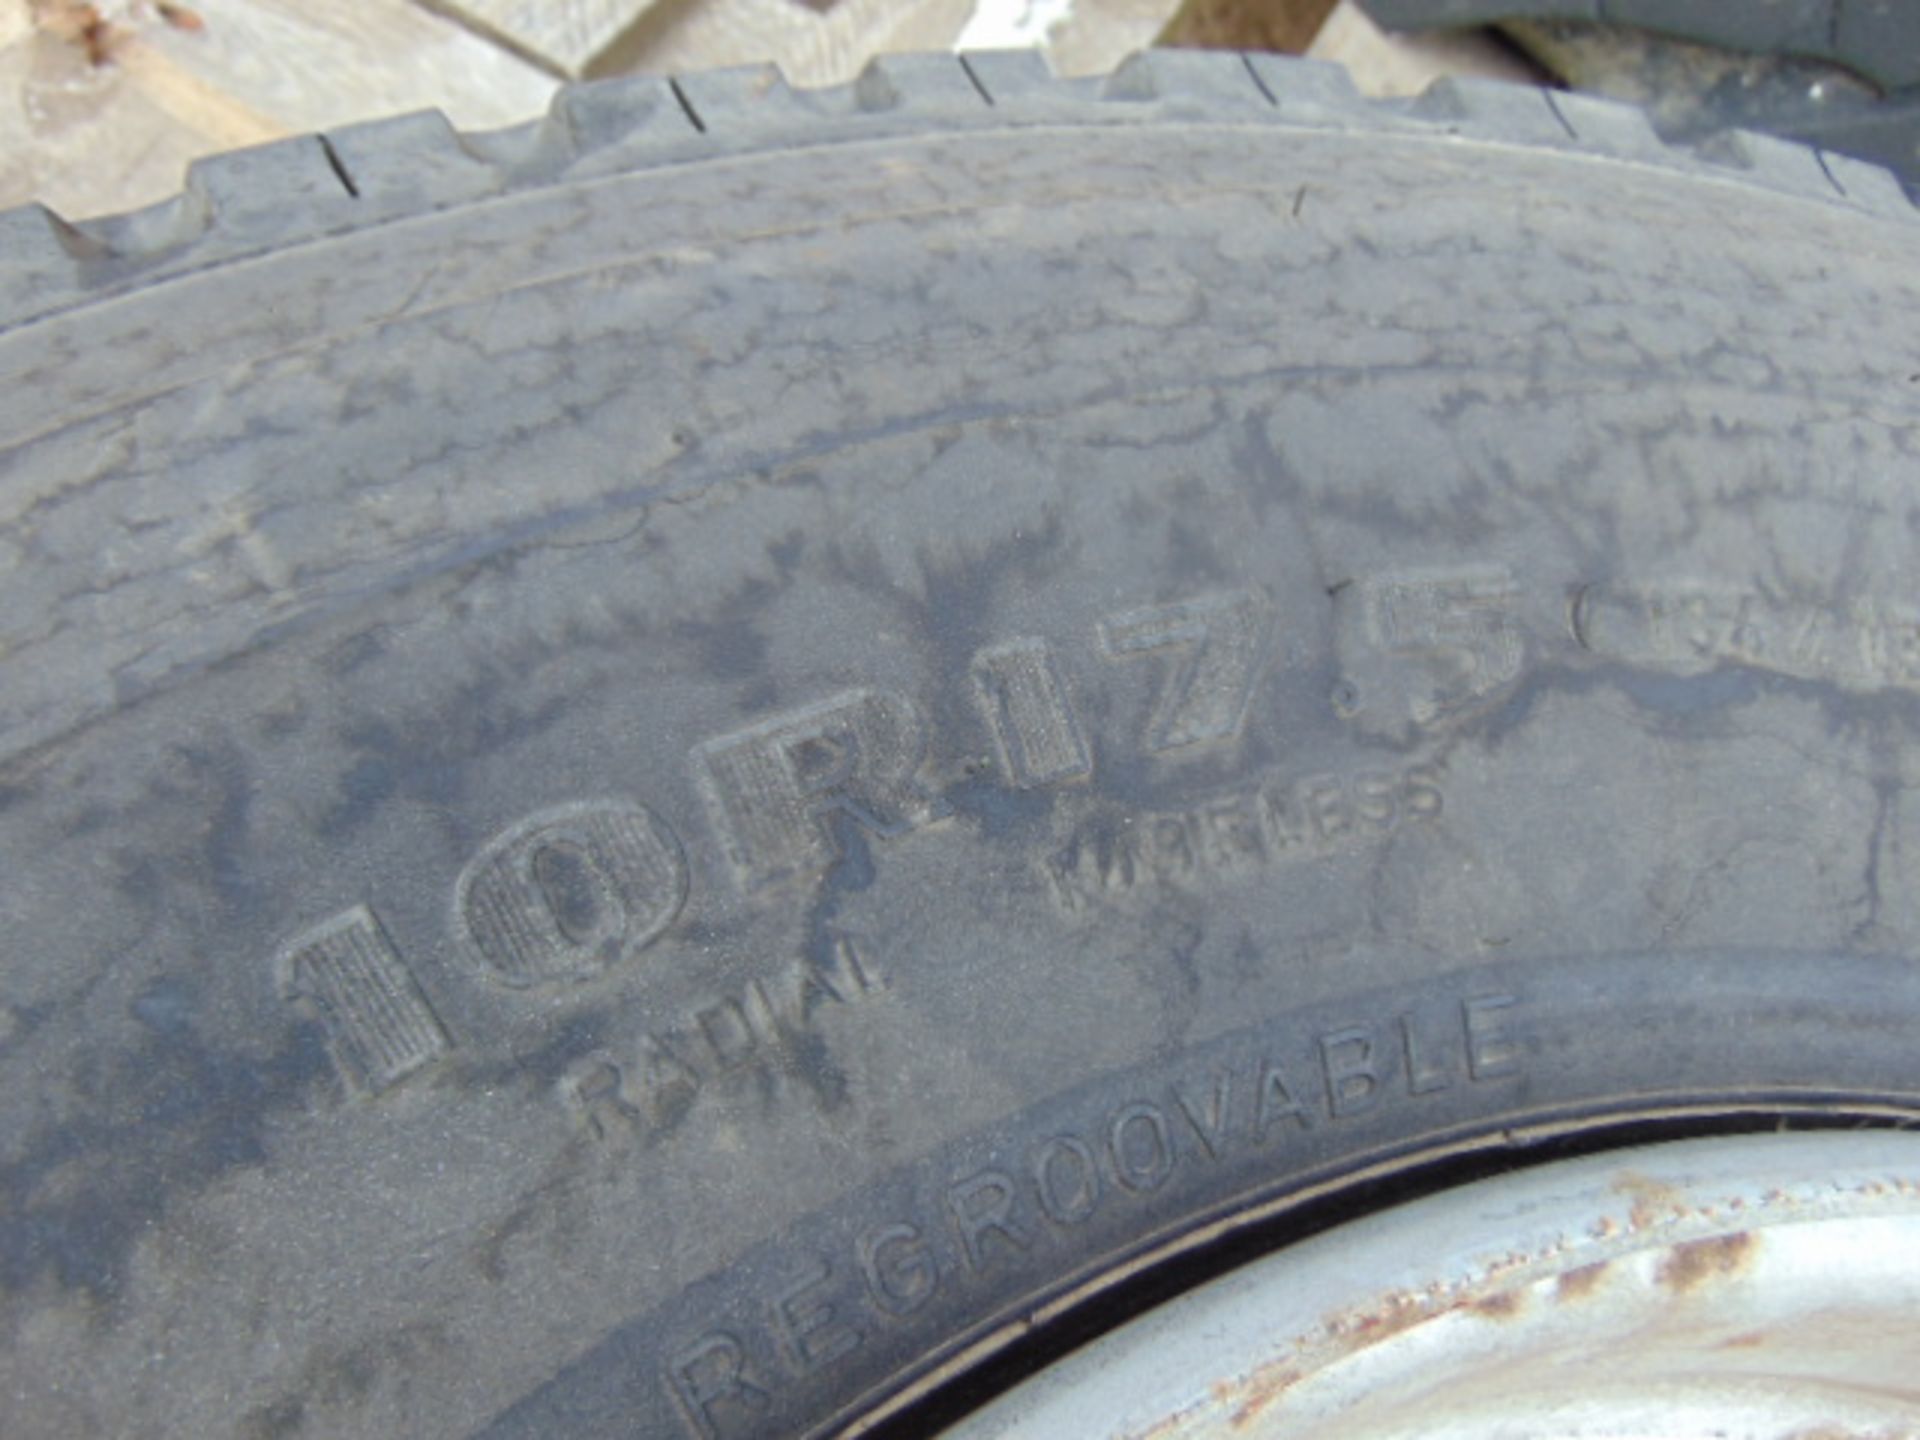 1 x Goodyear G291 10R 17.5 Tyre complete with 6 stud rim - Image 7 of 7